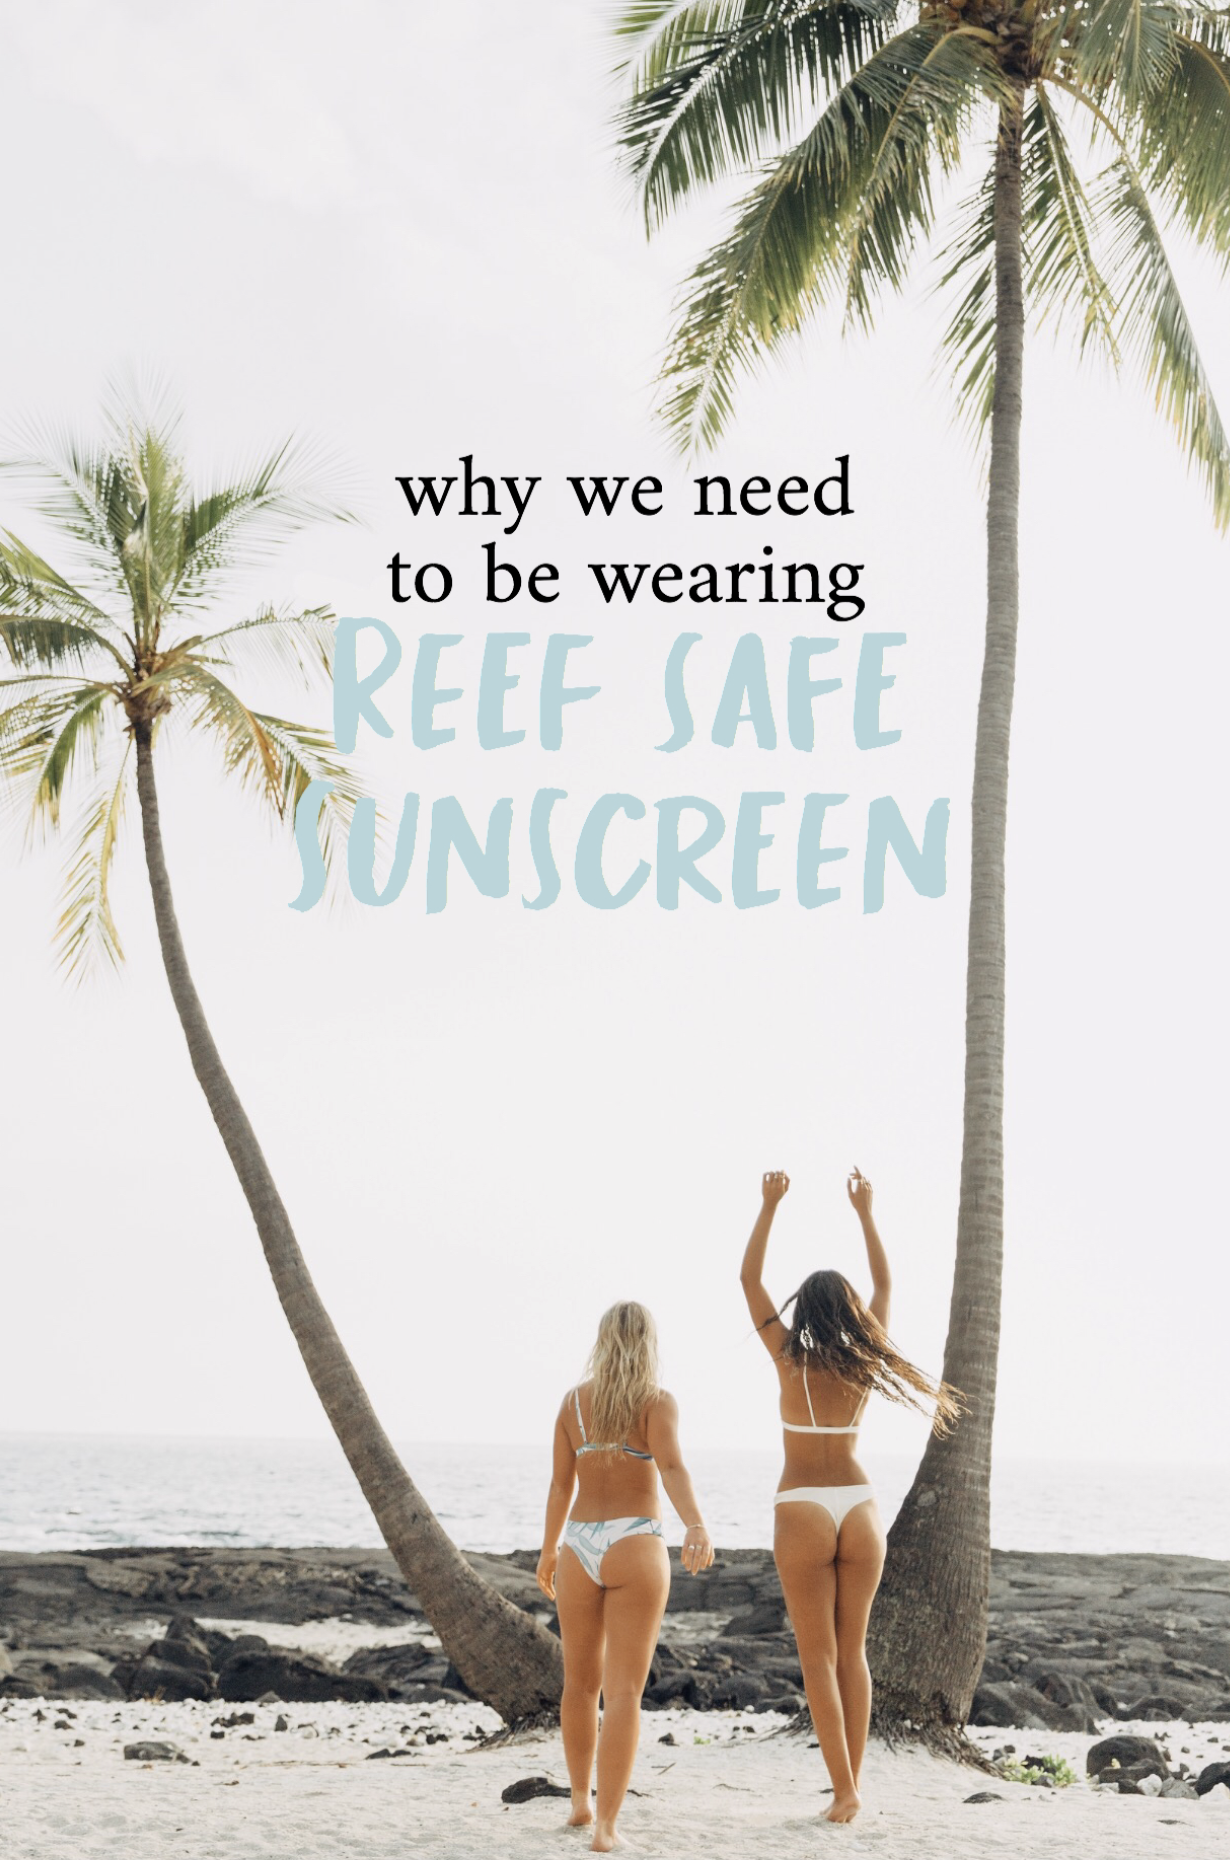 Travel Tips | Reef Safe Sunscreen | What To Pack for a Tropical Vacation | Tropical Vacation Packing Tips | Travel Tips for Kauai | Packing List for Kauai | Helpful Tips for Traveling to Kauai | Hawaii Travel Guide | What to pack for Hawaii | Best Vacation Places in the World via @elanaloo + elanaloo.com